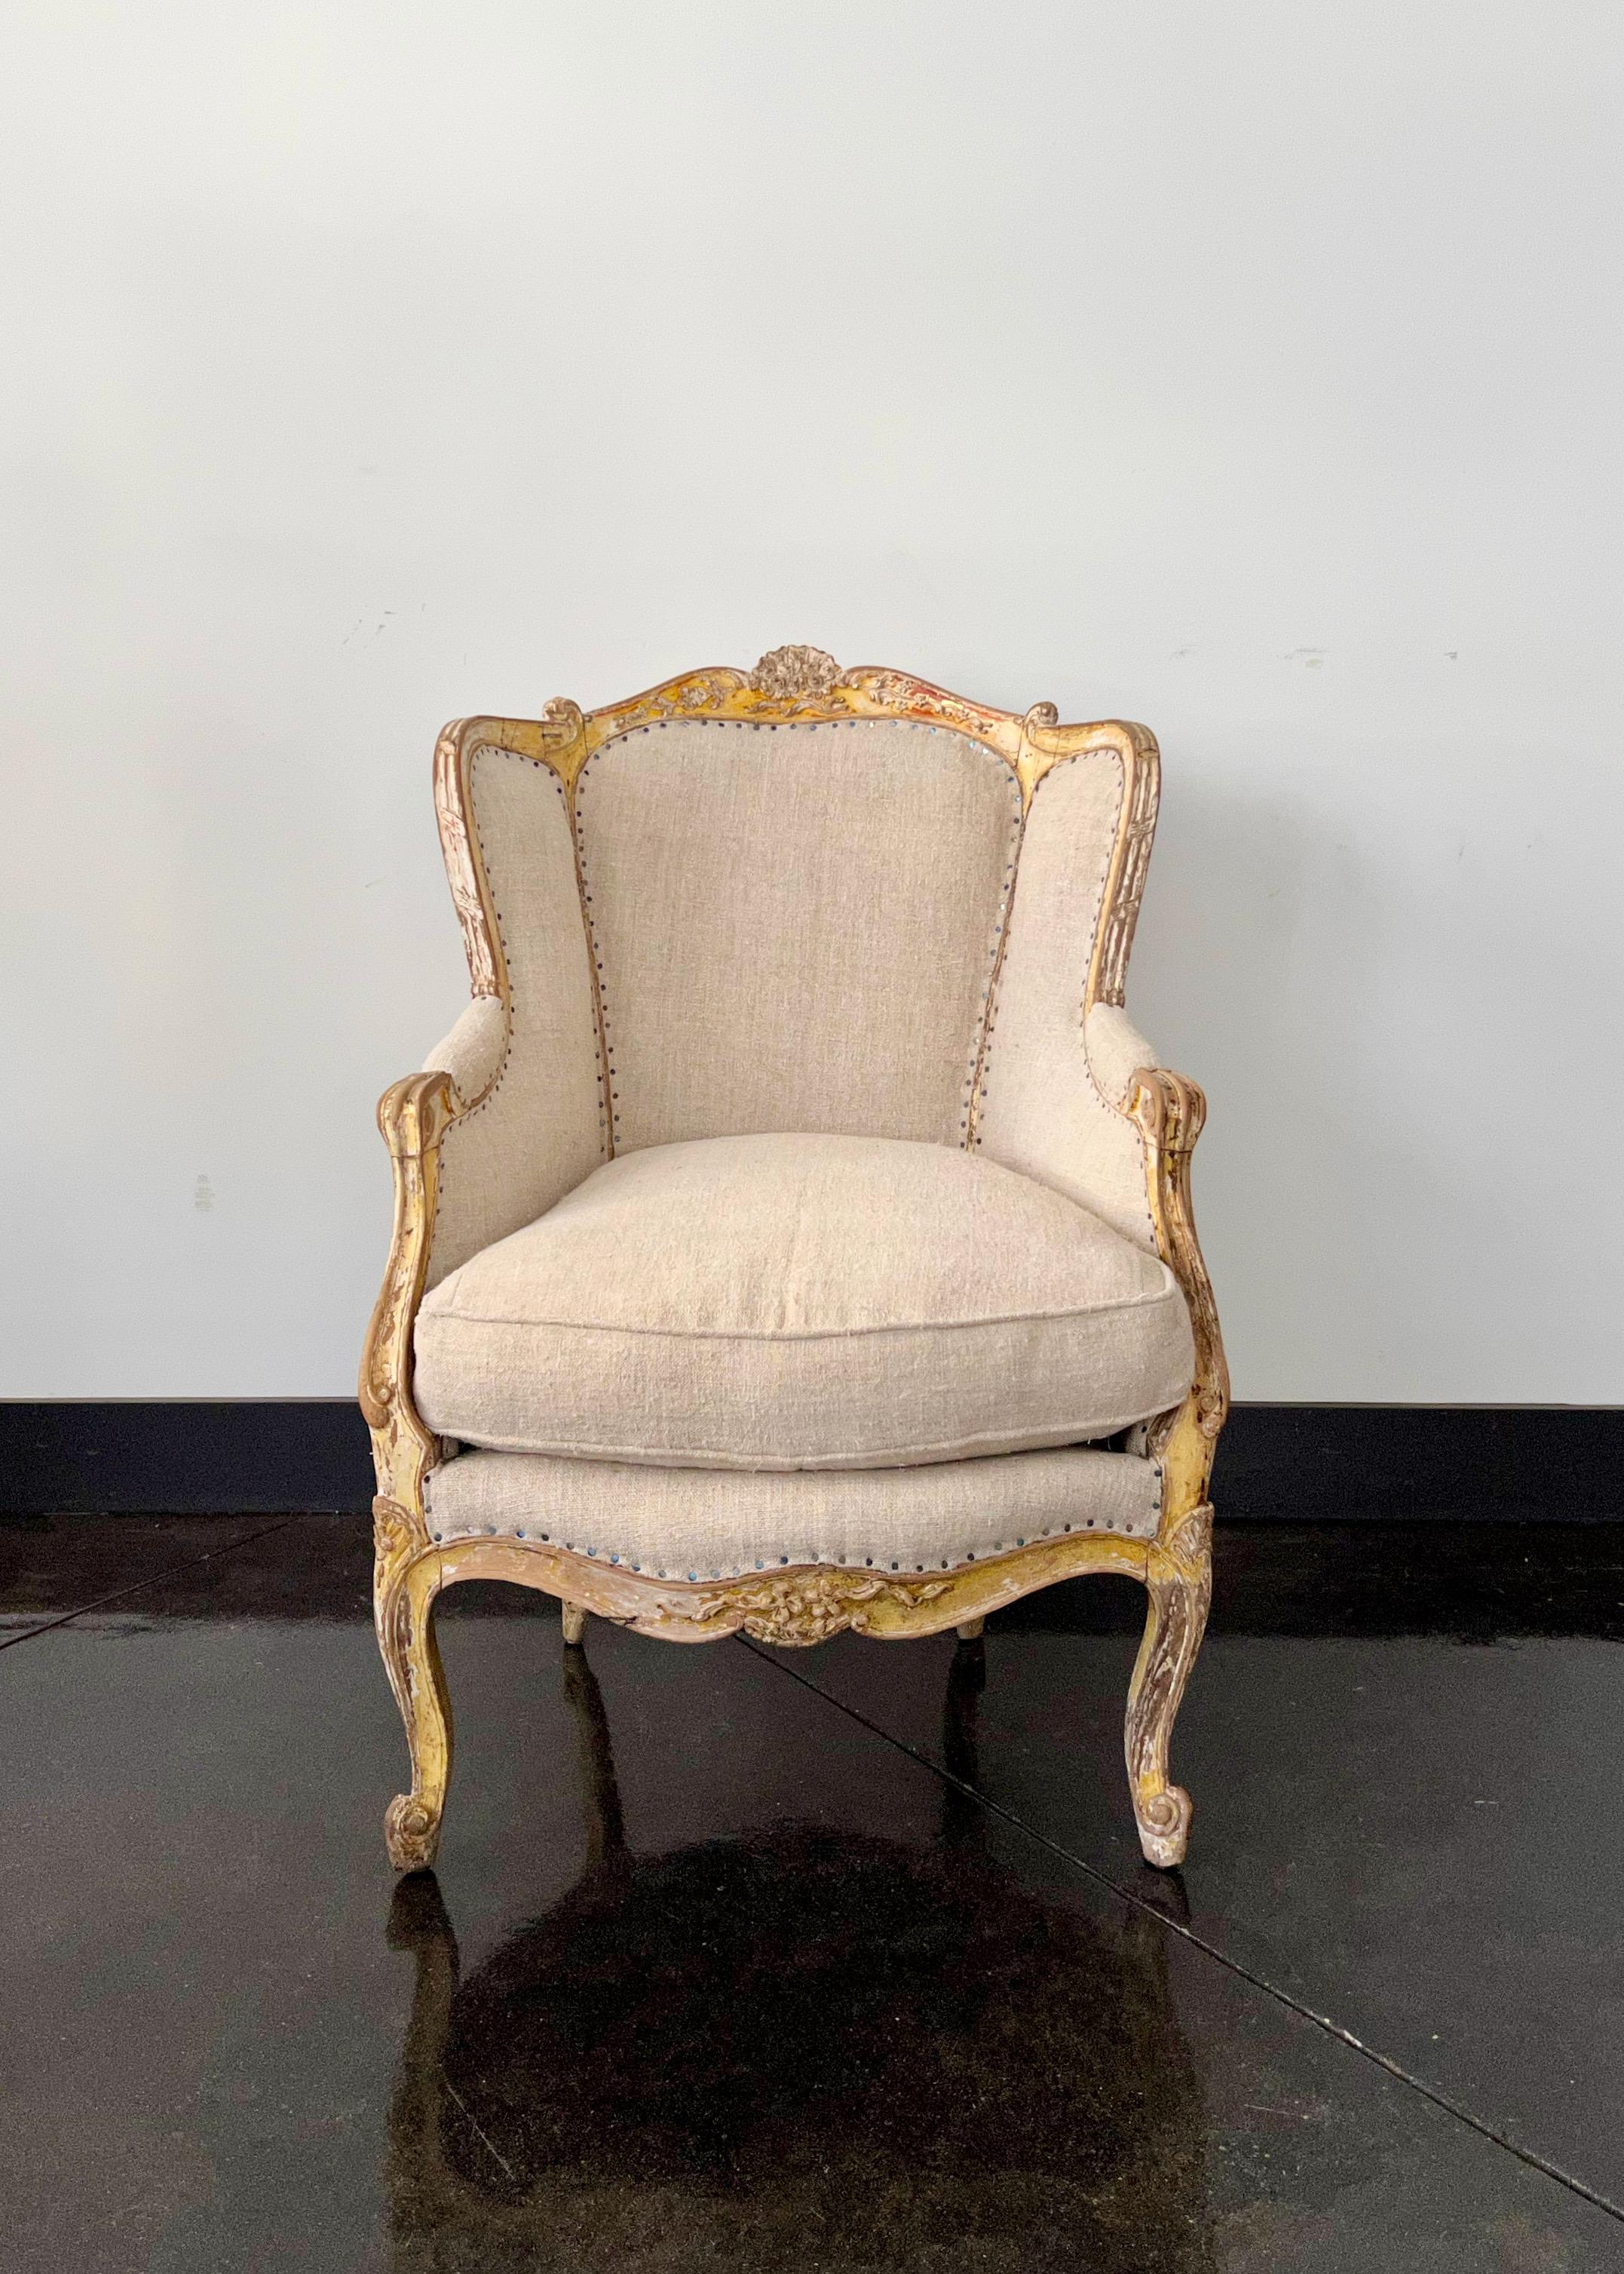 19th century French very wide and rare Bergère, Louis XV style in worn gold gilt with coved back which sweep without a break in to the armrests. Richly carved back and seat rails on elegant cabriole legs with flower carvings. Upholstered beautifully